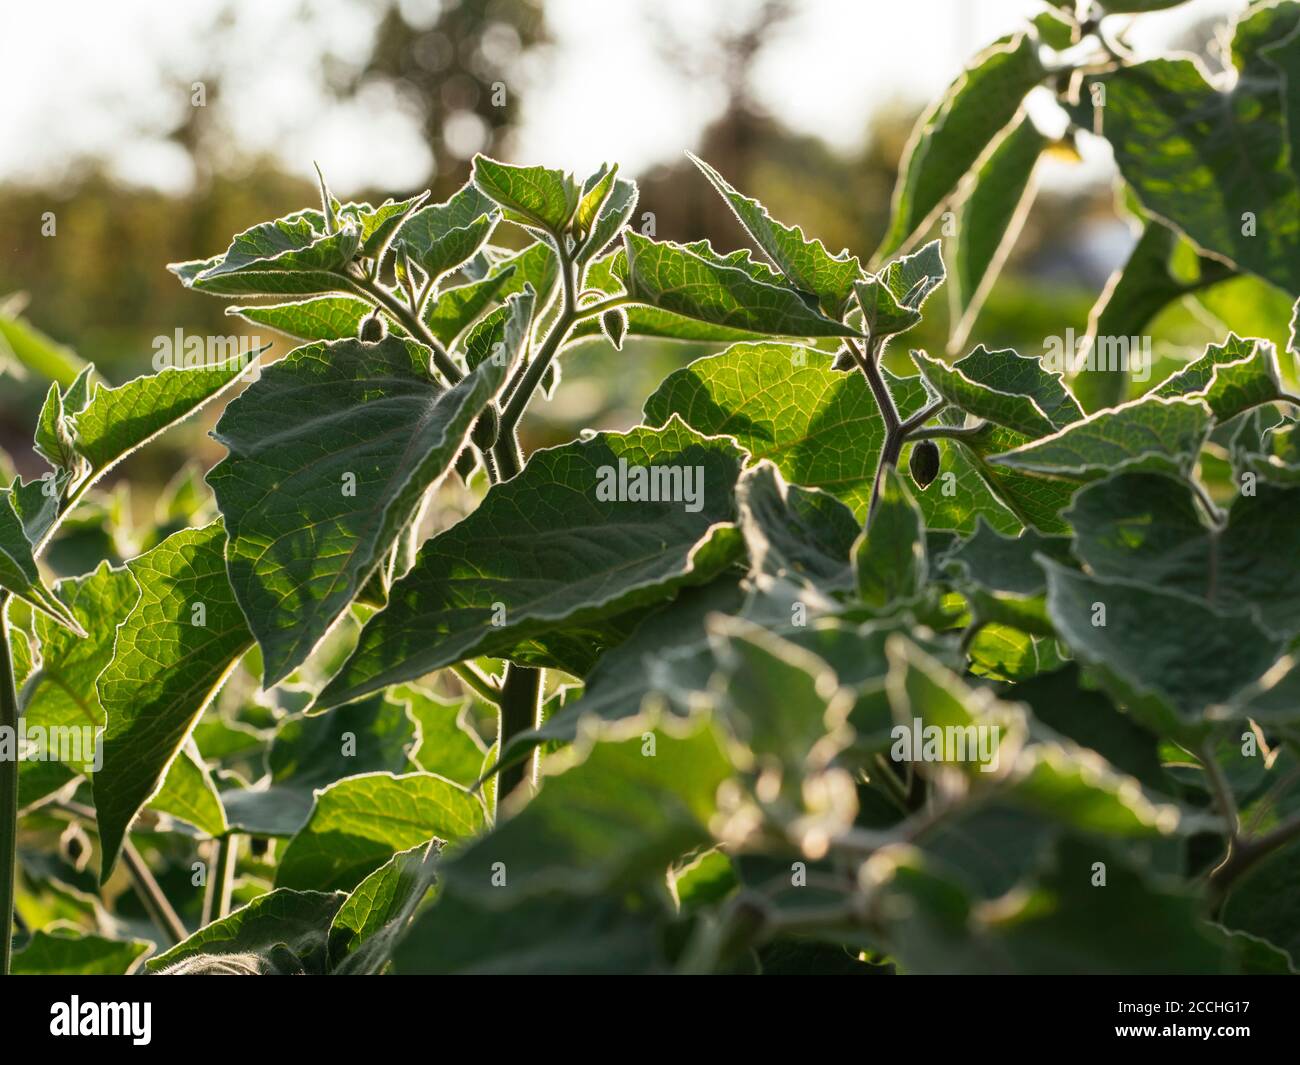 Physalis peruviana plants growing in a garden with flowers and green calyx Stock Photo